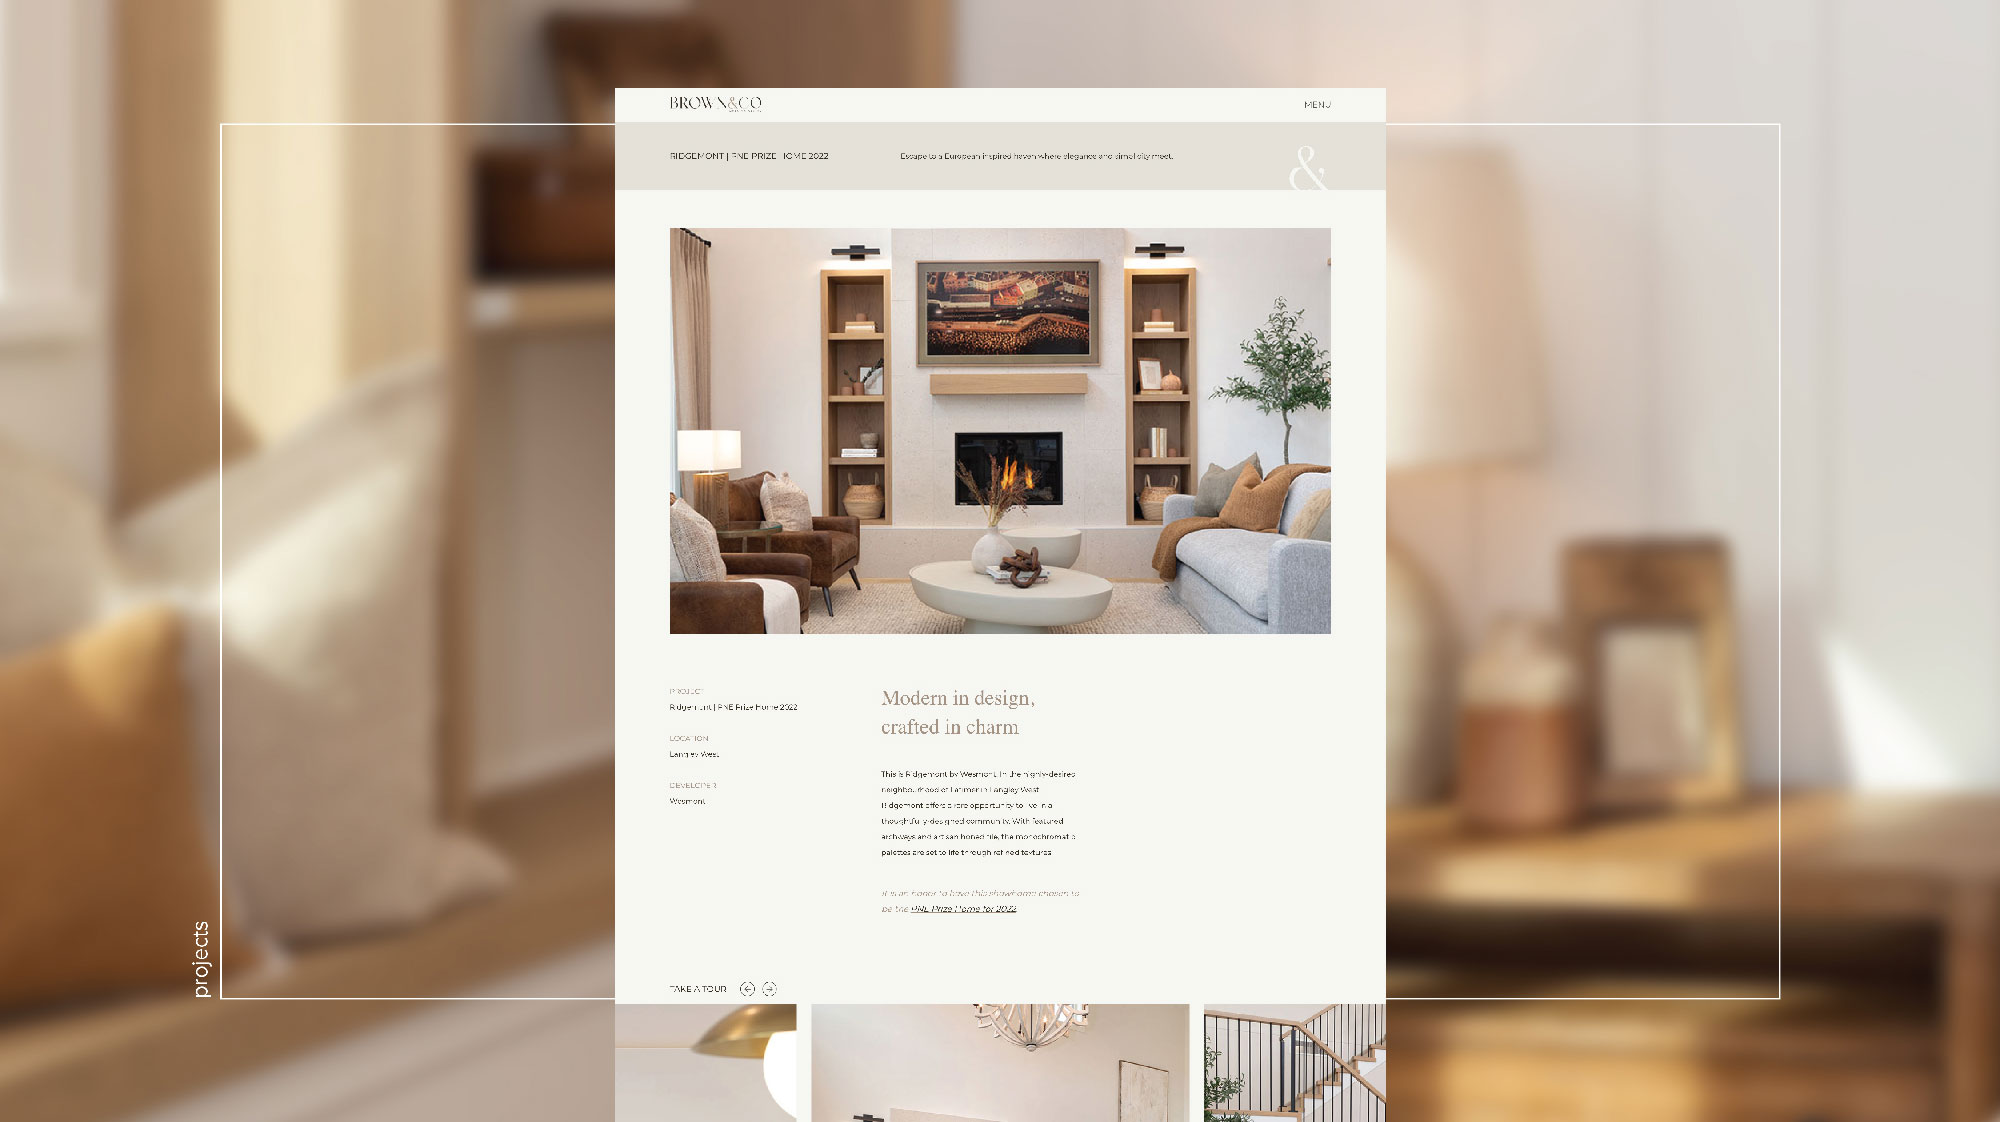 Brown&Co website project page – by White Canvas Design